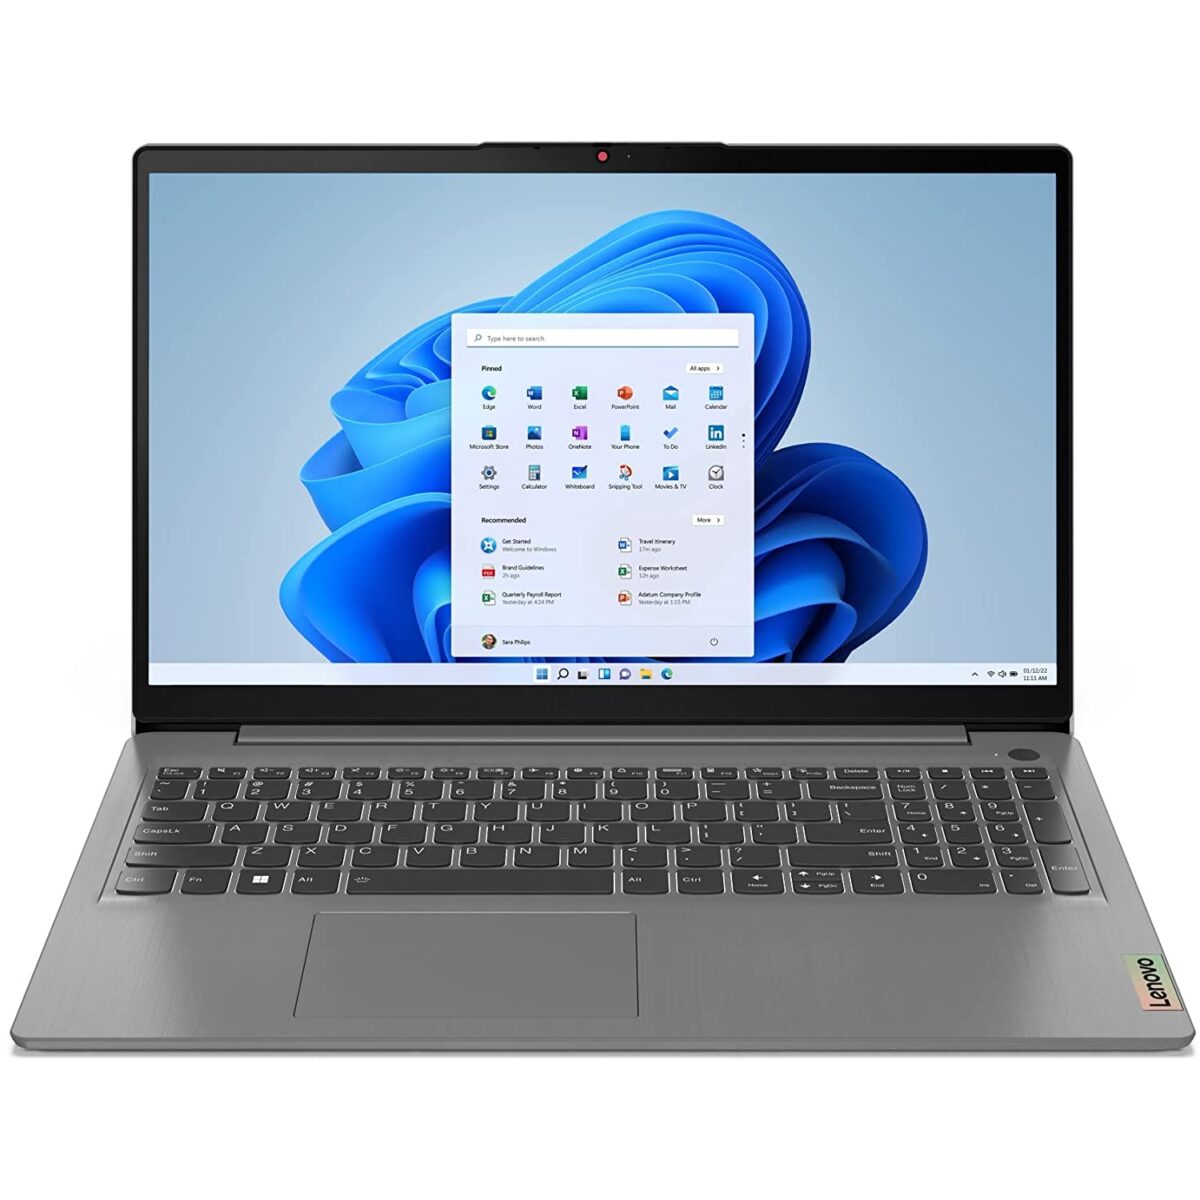 Lenovo IdeaPad Slim 3 82RK0062IN with 12th Gen Intel Core i5-1235U Launched in India